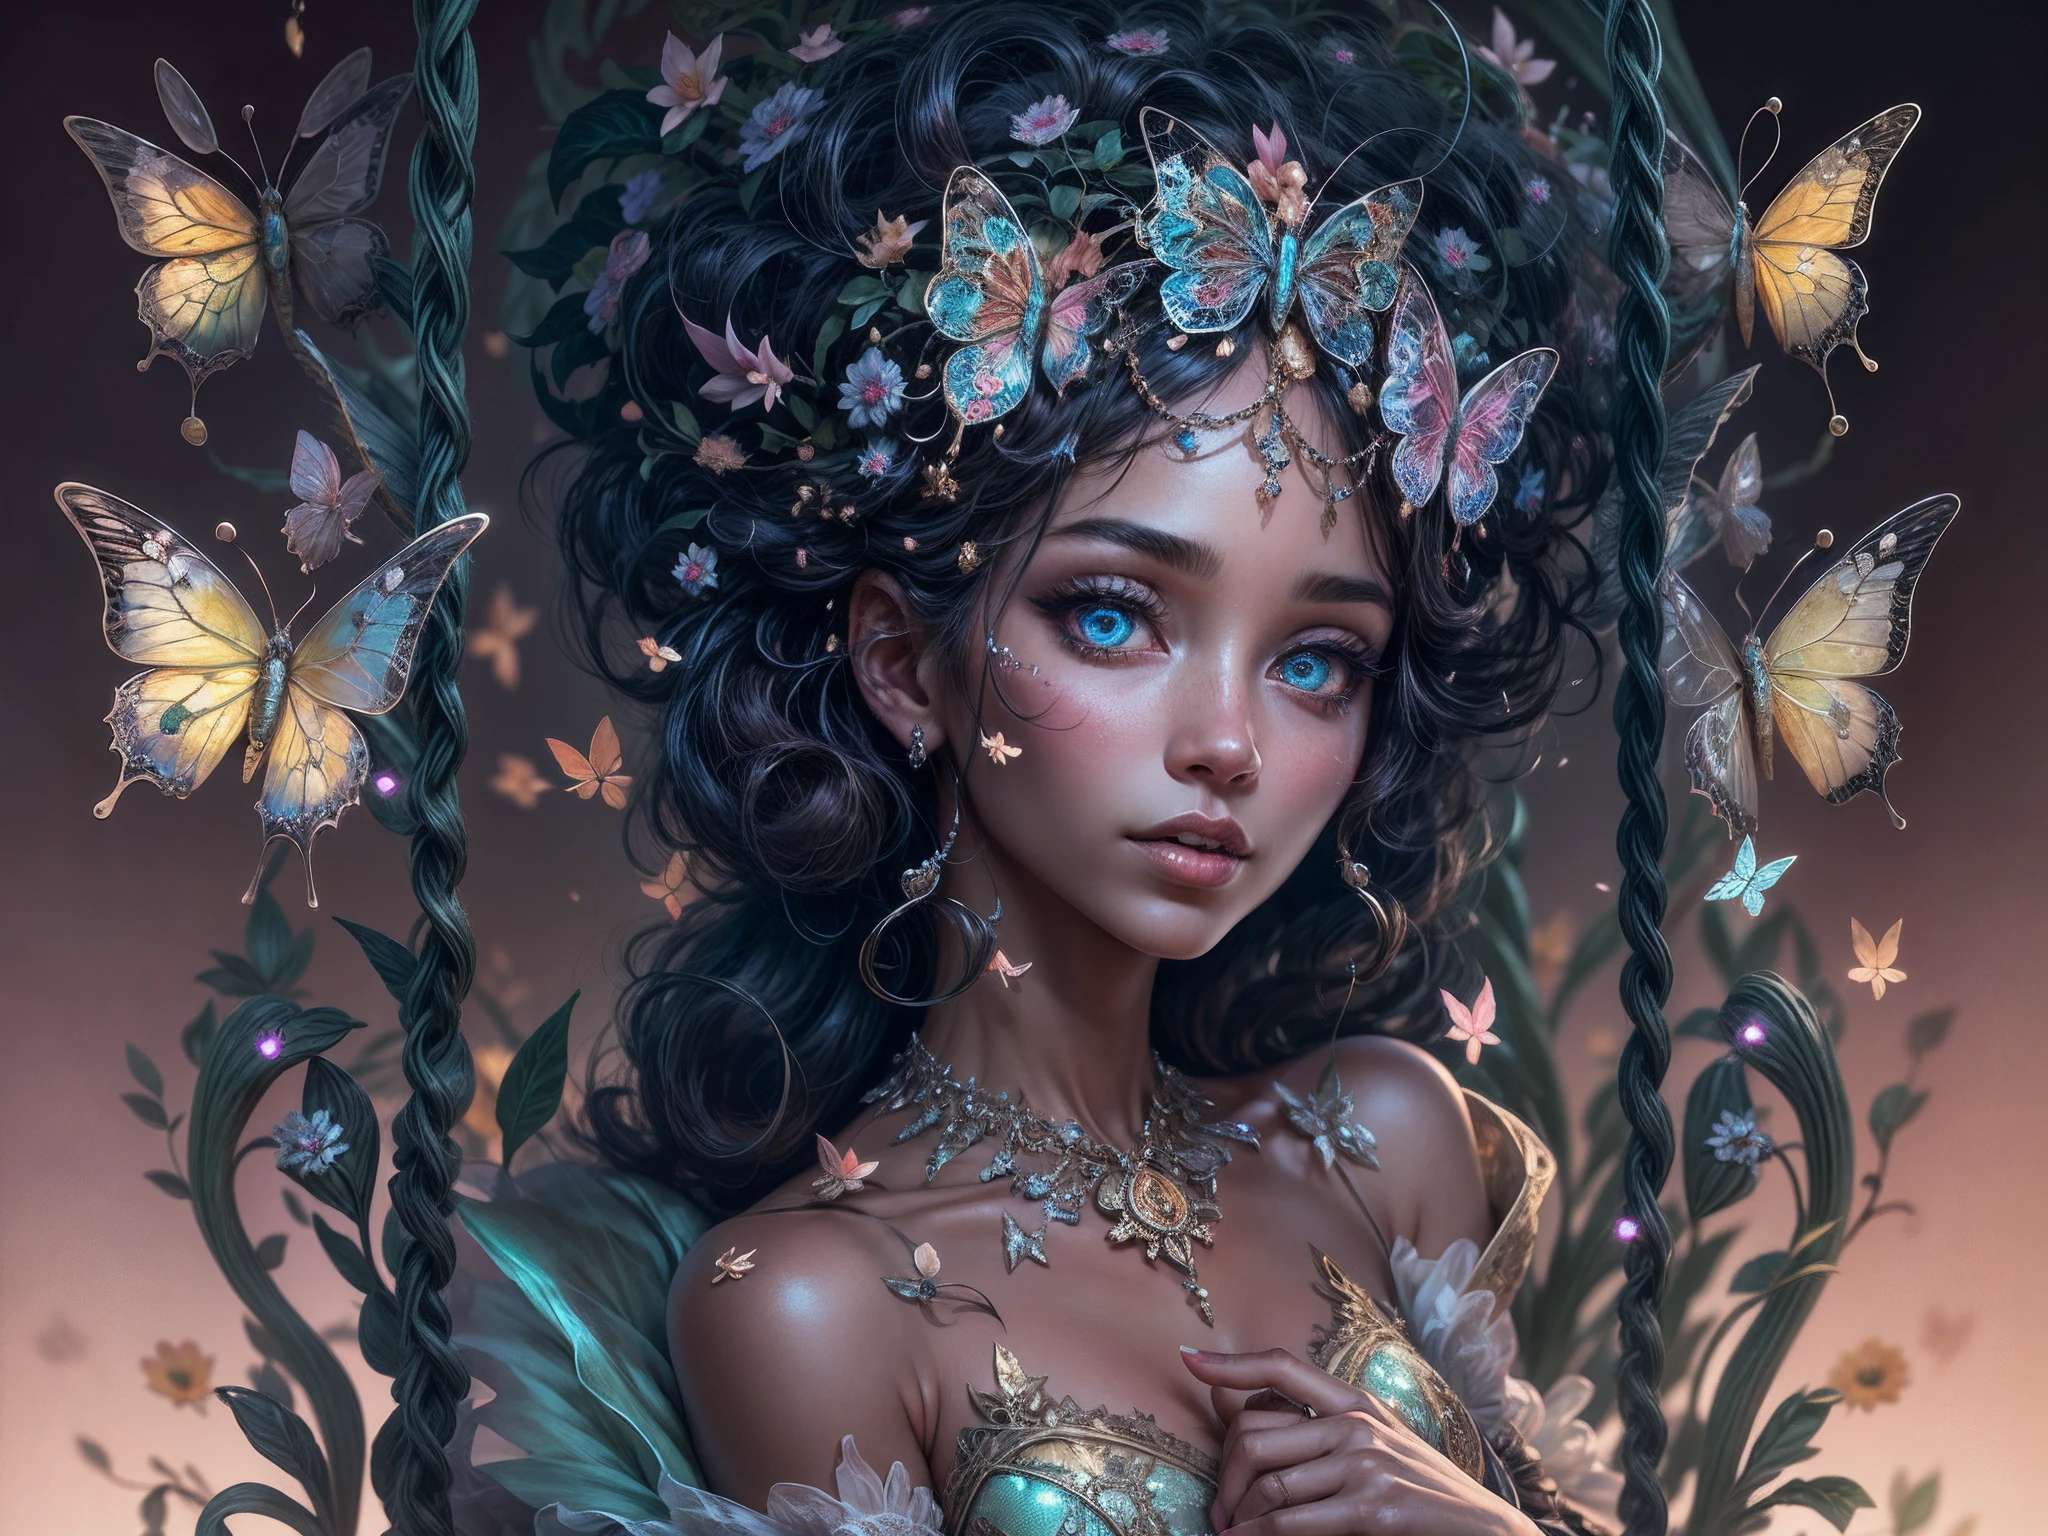 This is a realistic fantasy masterpiece with lots of shimmer, glitter, and intricate ornate detail. Generate one  woman with a beautiful and delicate crown sitting on a garden swing at night. She is a beautiful and seductive butterfly queen with stunning curly black hair, (((incredibly realistic and detailed dynamic eyes in bright colors with realistic shading))).  Her skin is translucent white, her eyes sparkle, and her dress is elegant. Her dress is spun of the finest gossamer silk with delicate, intricate, and subtle floral detailing and gold silk butterfly sleeves. Her face is lovely and . Include glow-in-the-dark flowers, lots of particles, highly realistic fantasy butteflies with translucent jewel-toned wings and fine detailing, and glow. The artwork is done in the style of Guviz and brings to mind masters in the genre such as trending fantasy works on Artstation and Midjourney. Camera: Utilize dynamic composition techniques to emphasize etherealness and delicate detail.